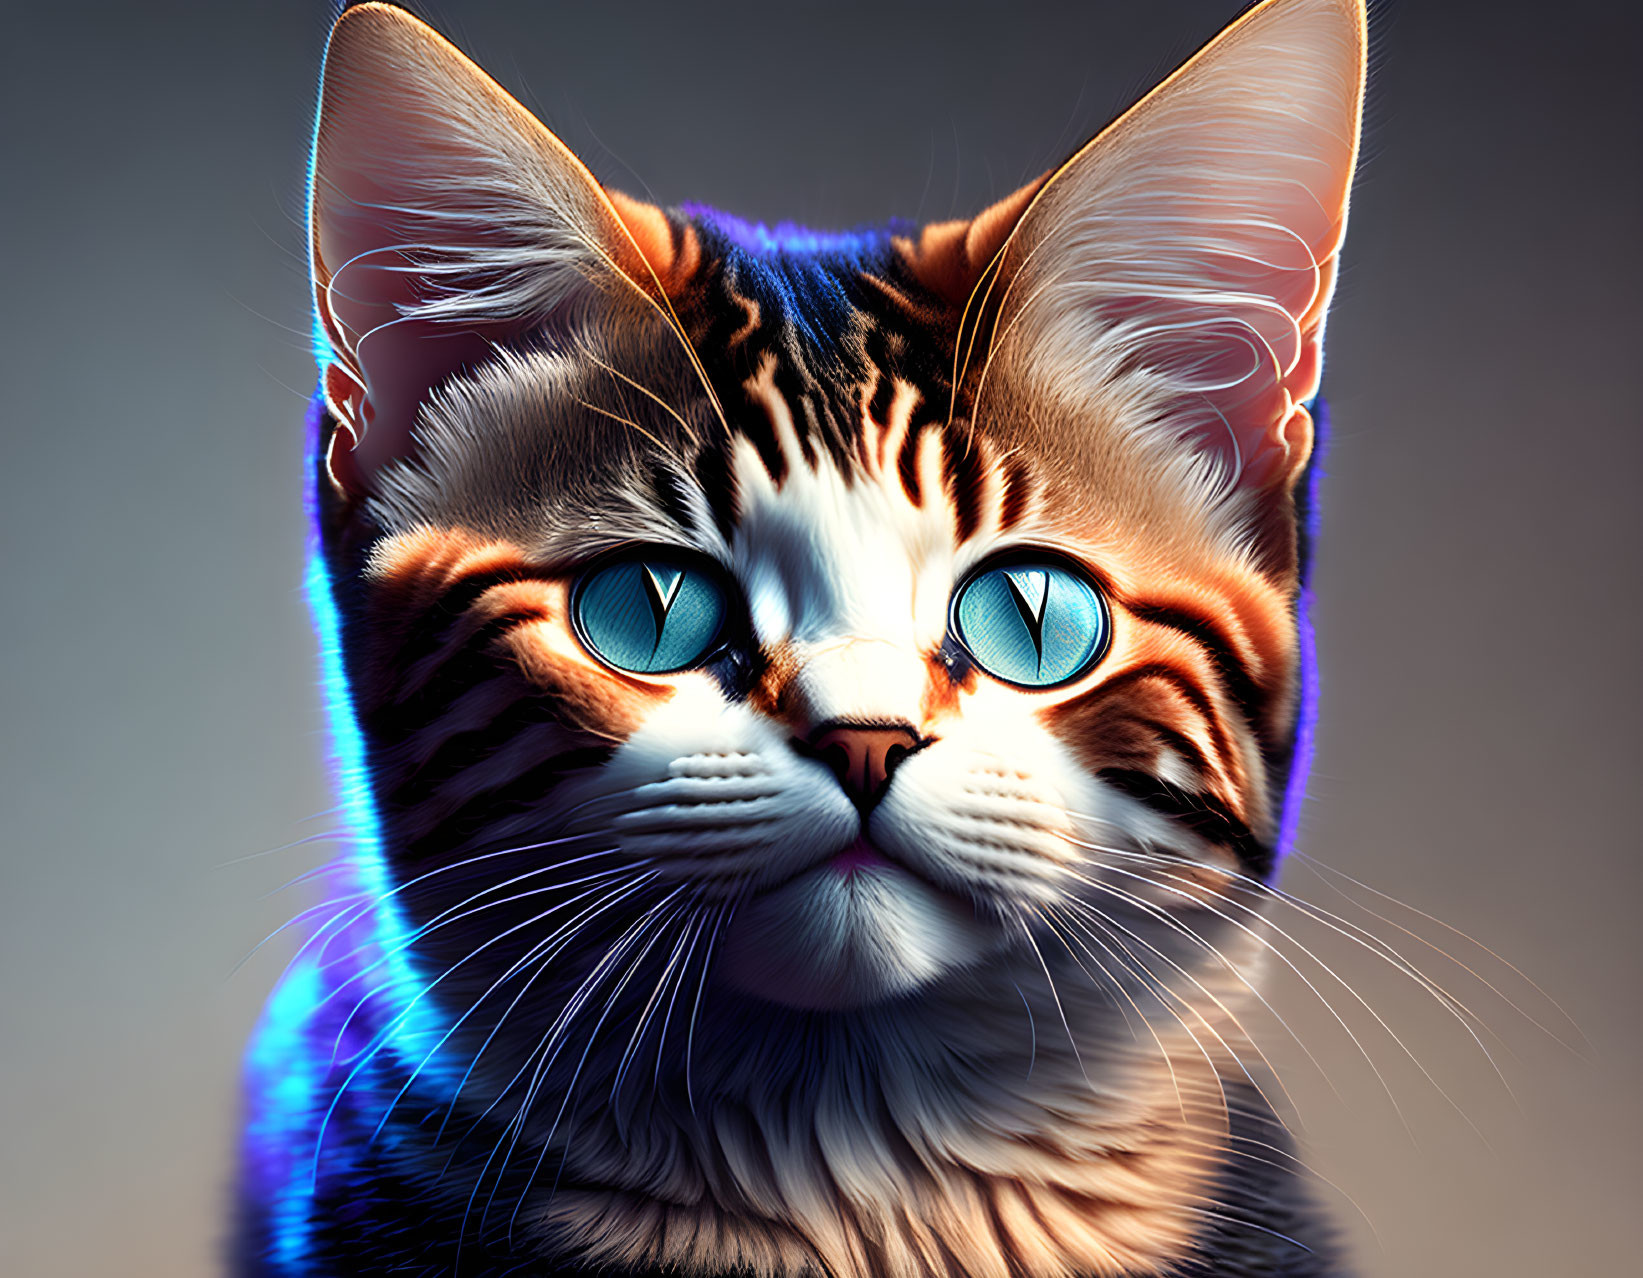 Detailed Hyper-Realistic Cat Illustration with Blue Eyes and Orange, Black, White Fur